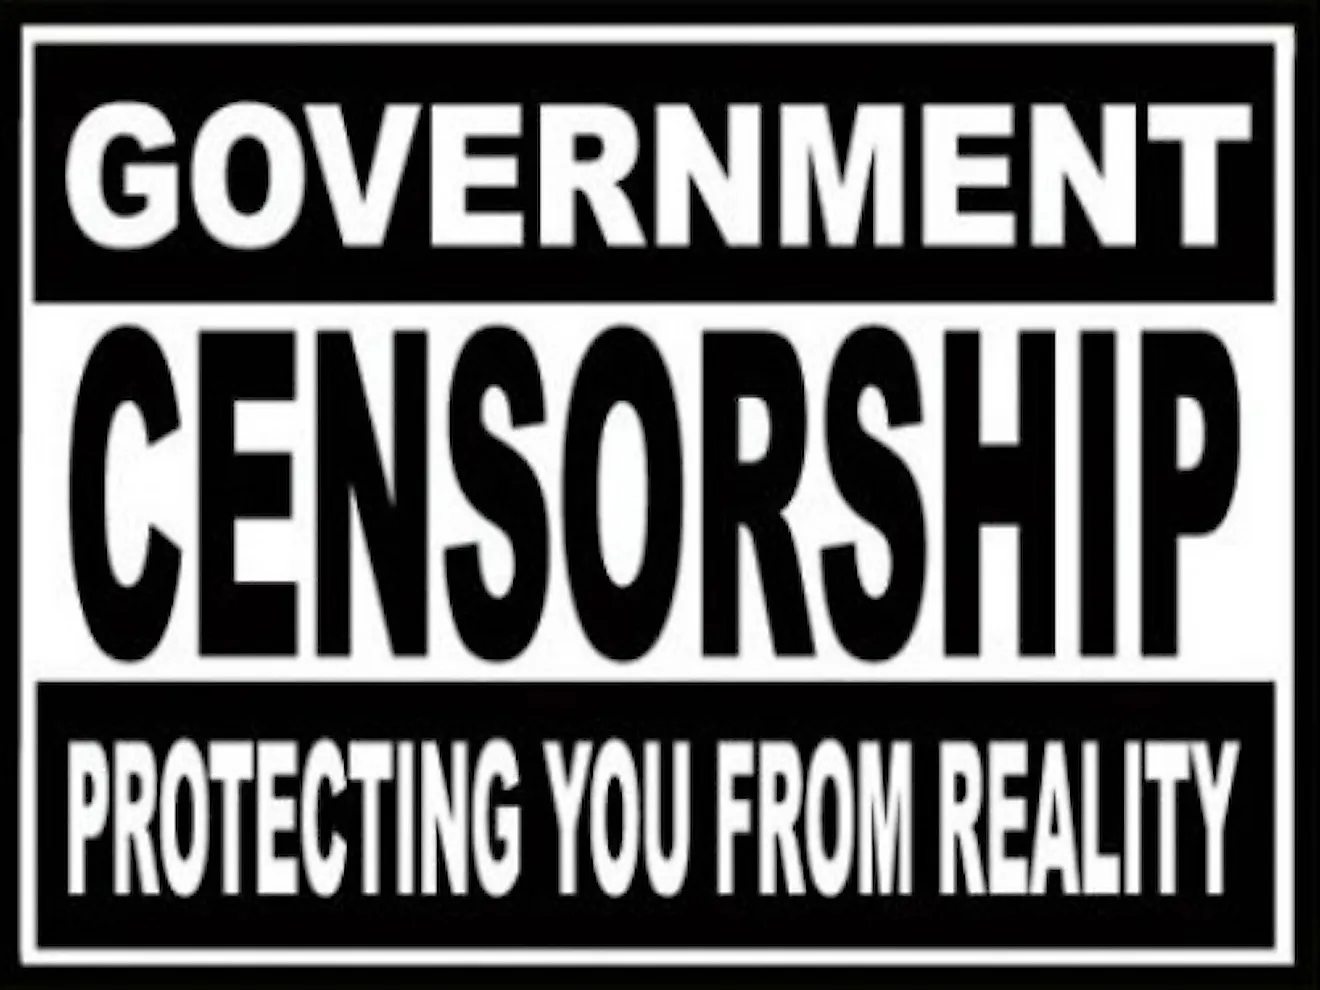 Government Censorship - protecting you from reality